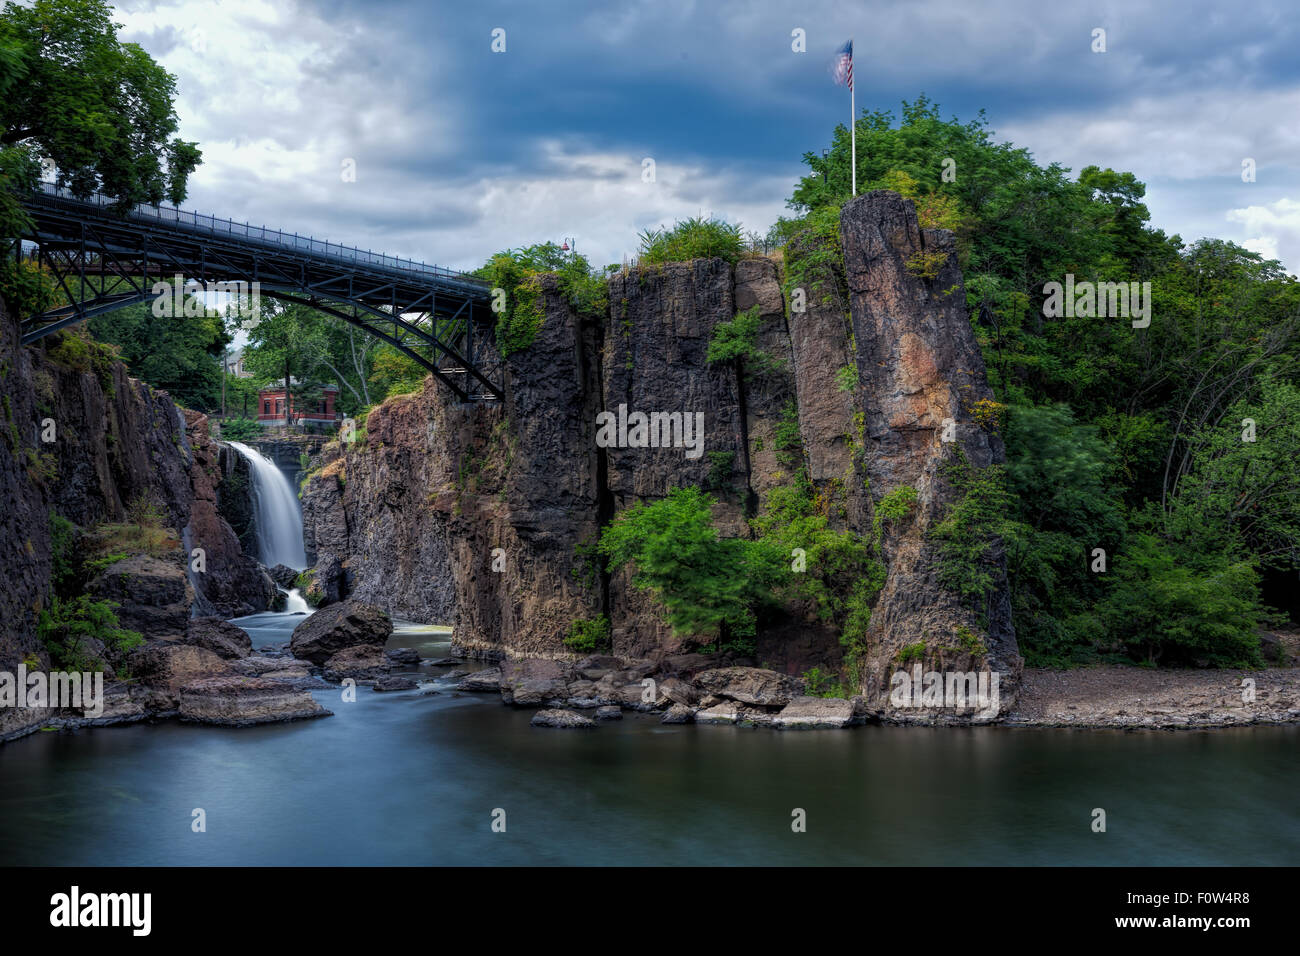 Paterson Great Falls  - View to the Great Falls on the Passaic River in the city of Paterson in Passaic County, New Jersey, United States. The Waterfalls of the Passaic River is a prominent waterfall, at 77 feet high. Stock Photo